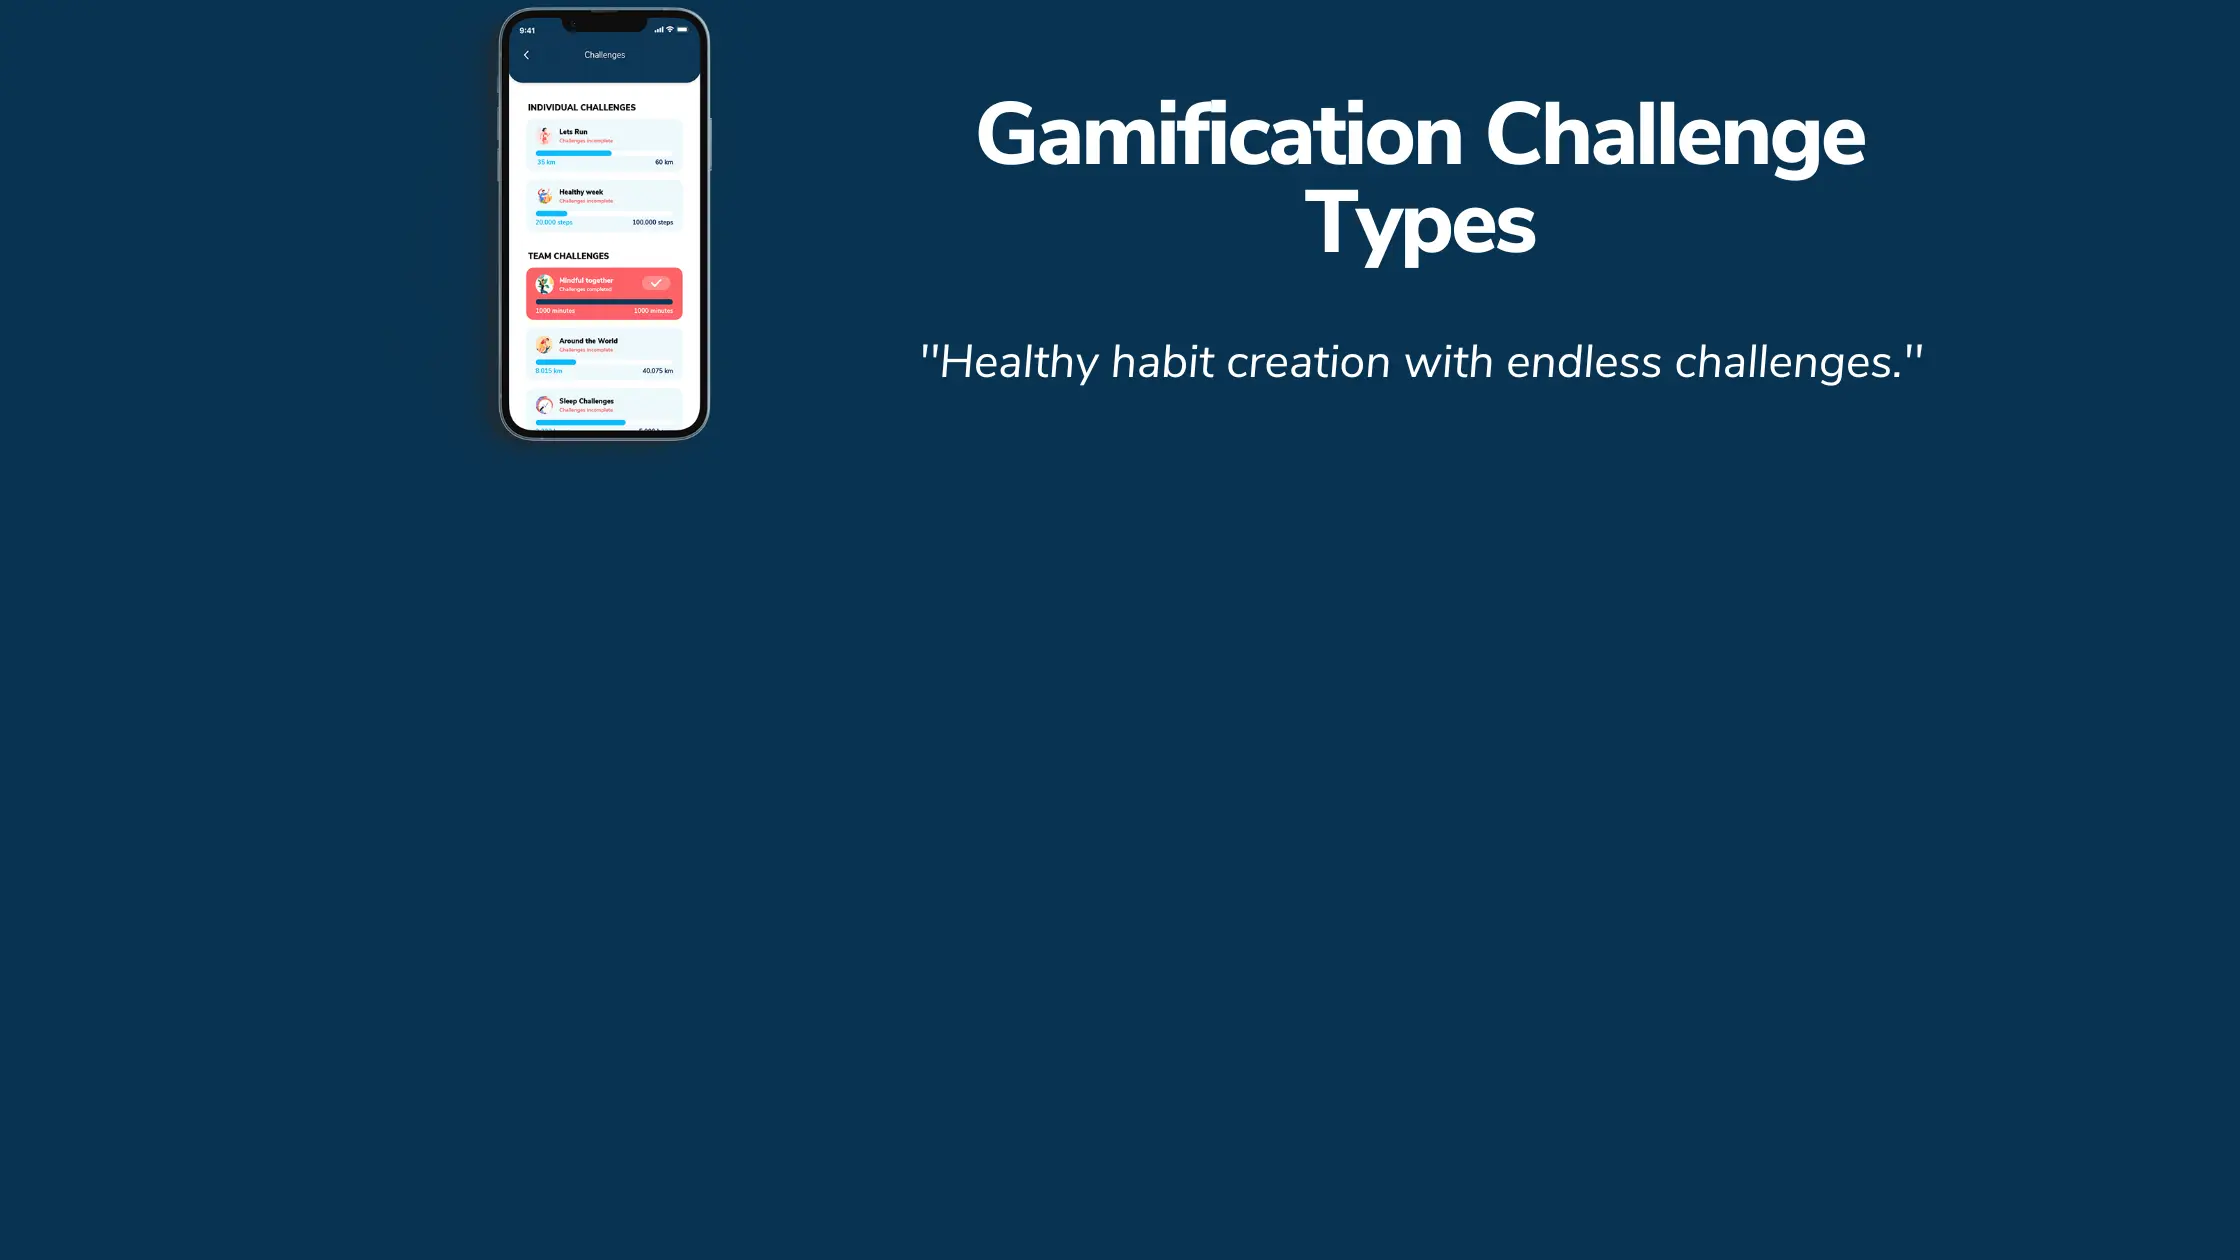 articles/images/Blog_afbeelding_-_Gamification_Challenge_Types-3.webp